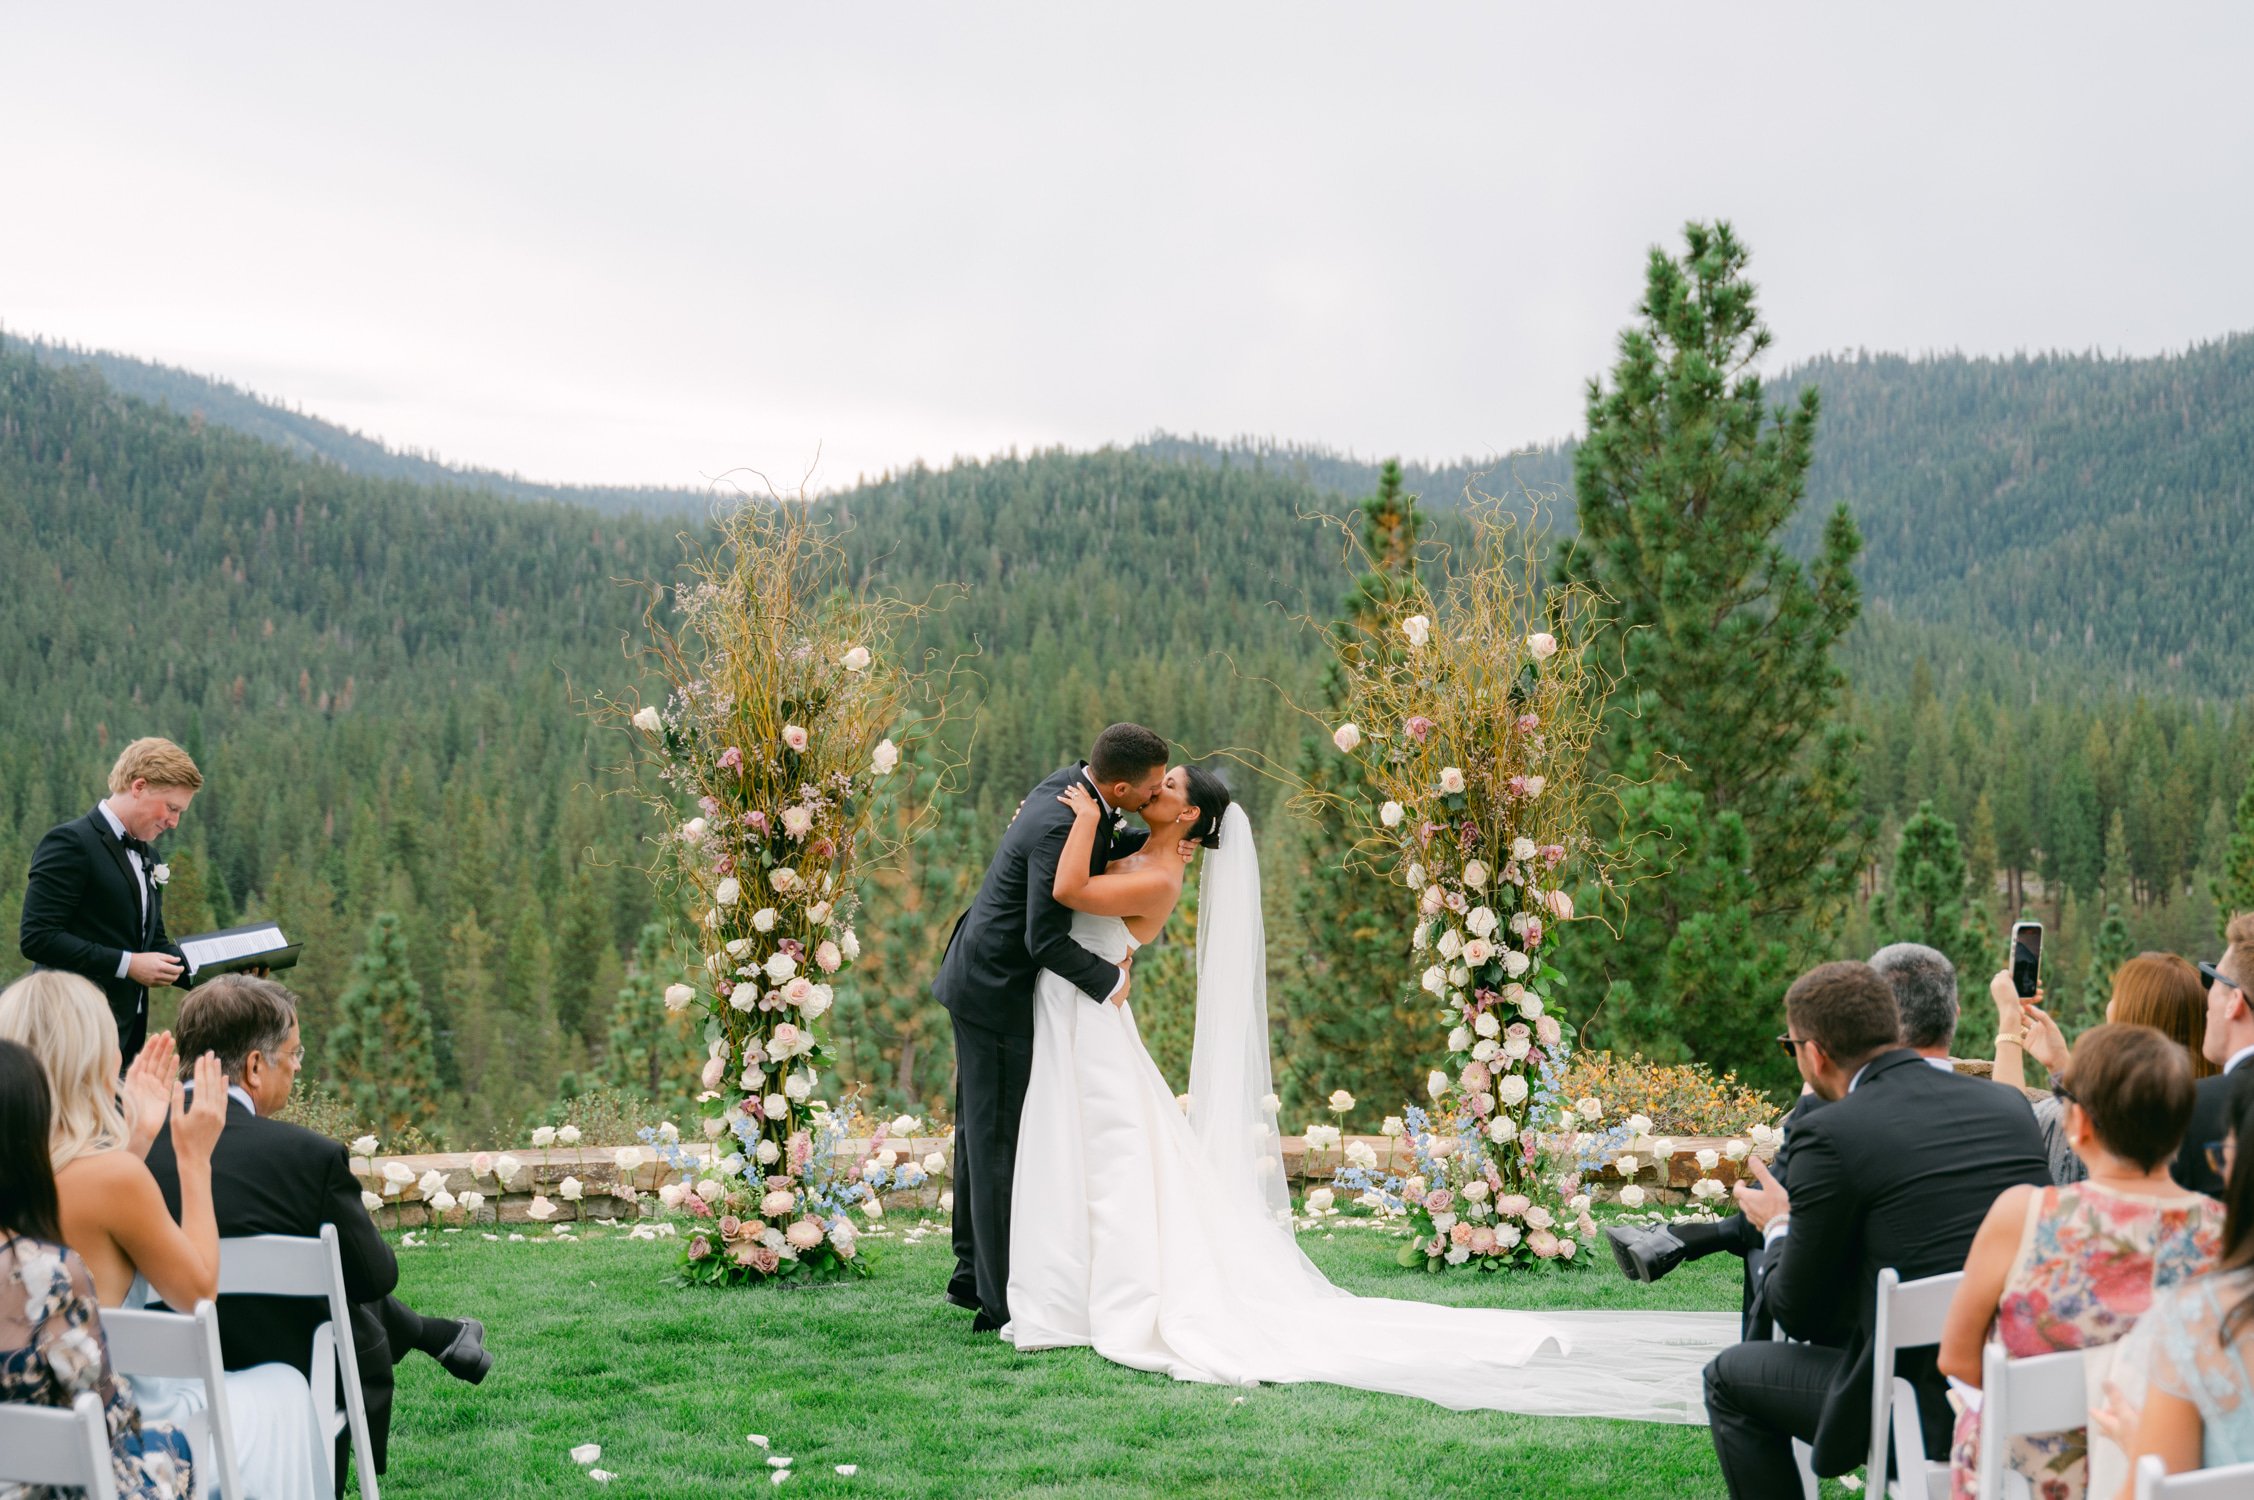 Martis Camp Wedding, photo of the newlywed couple’s first kiss at their outdoor wedding ceremony